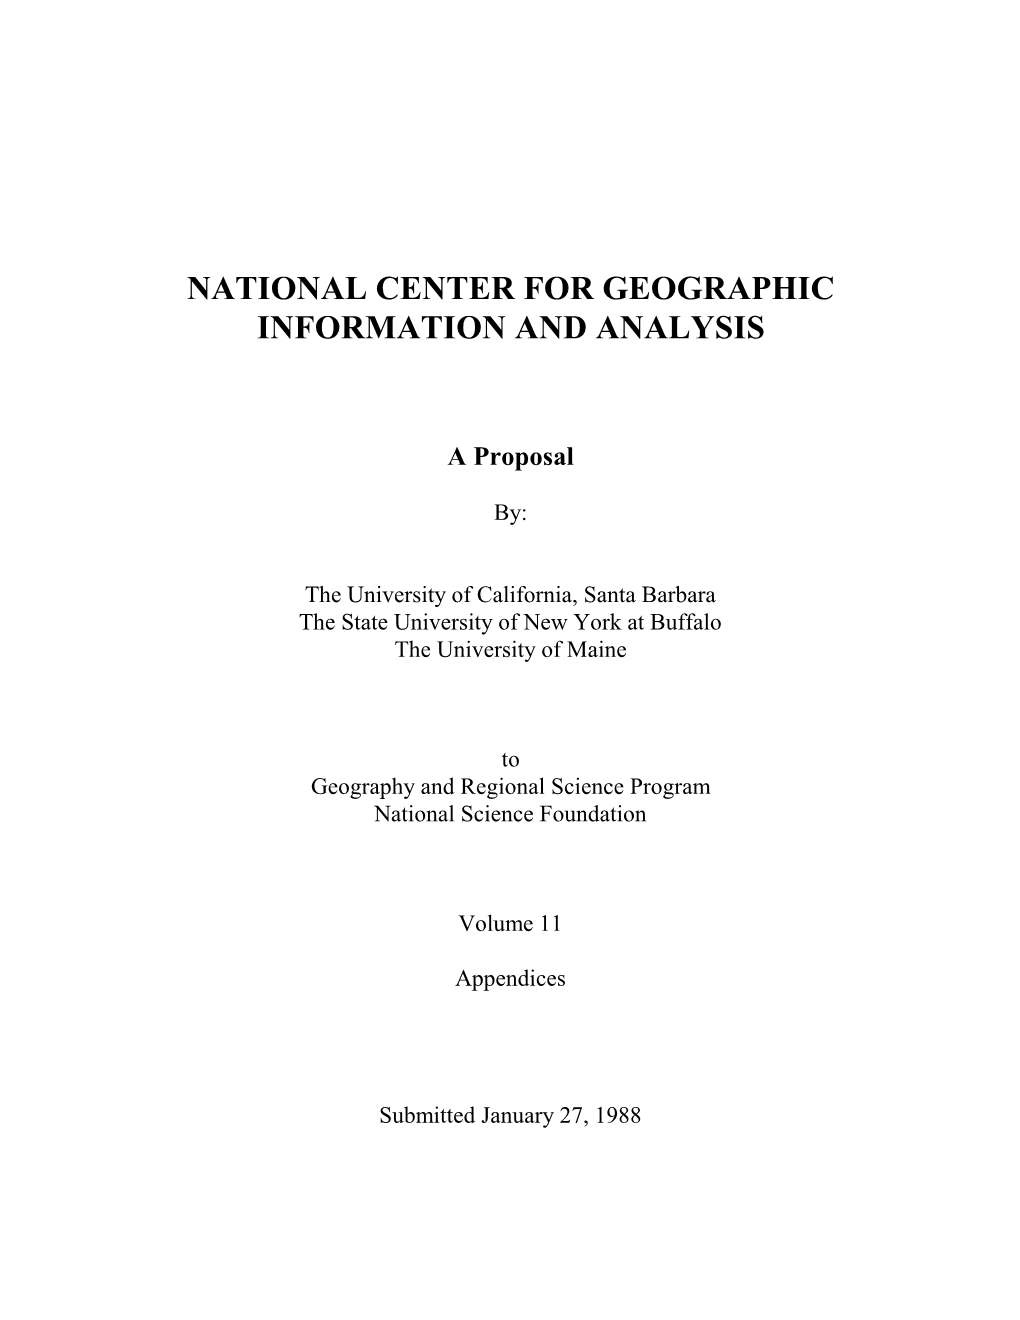 National Center for Geographic Information and Analysis